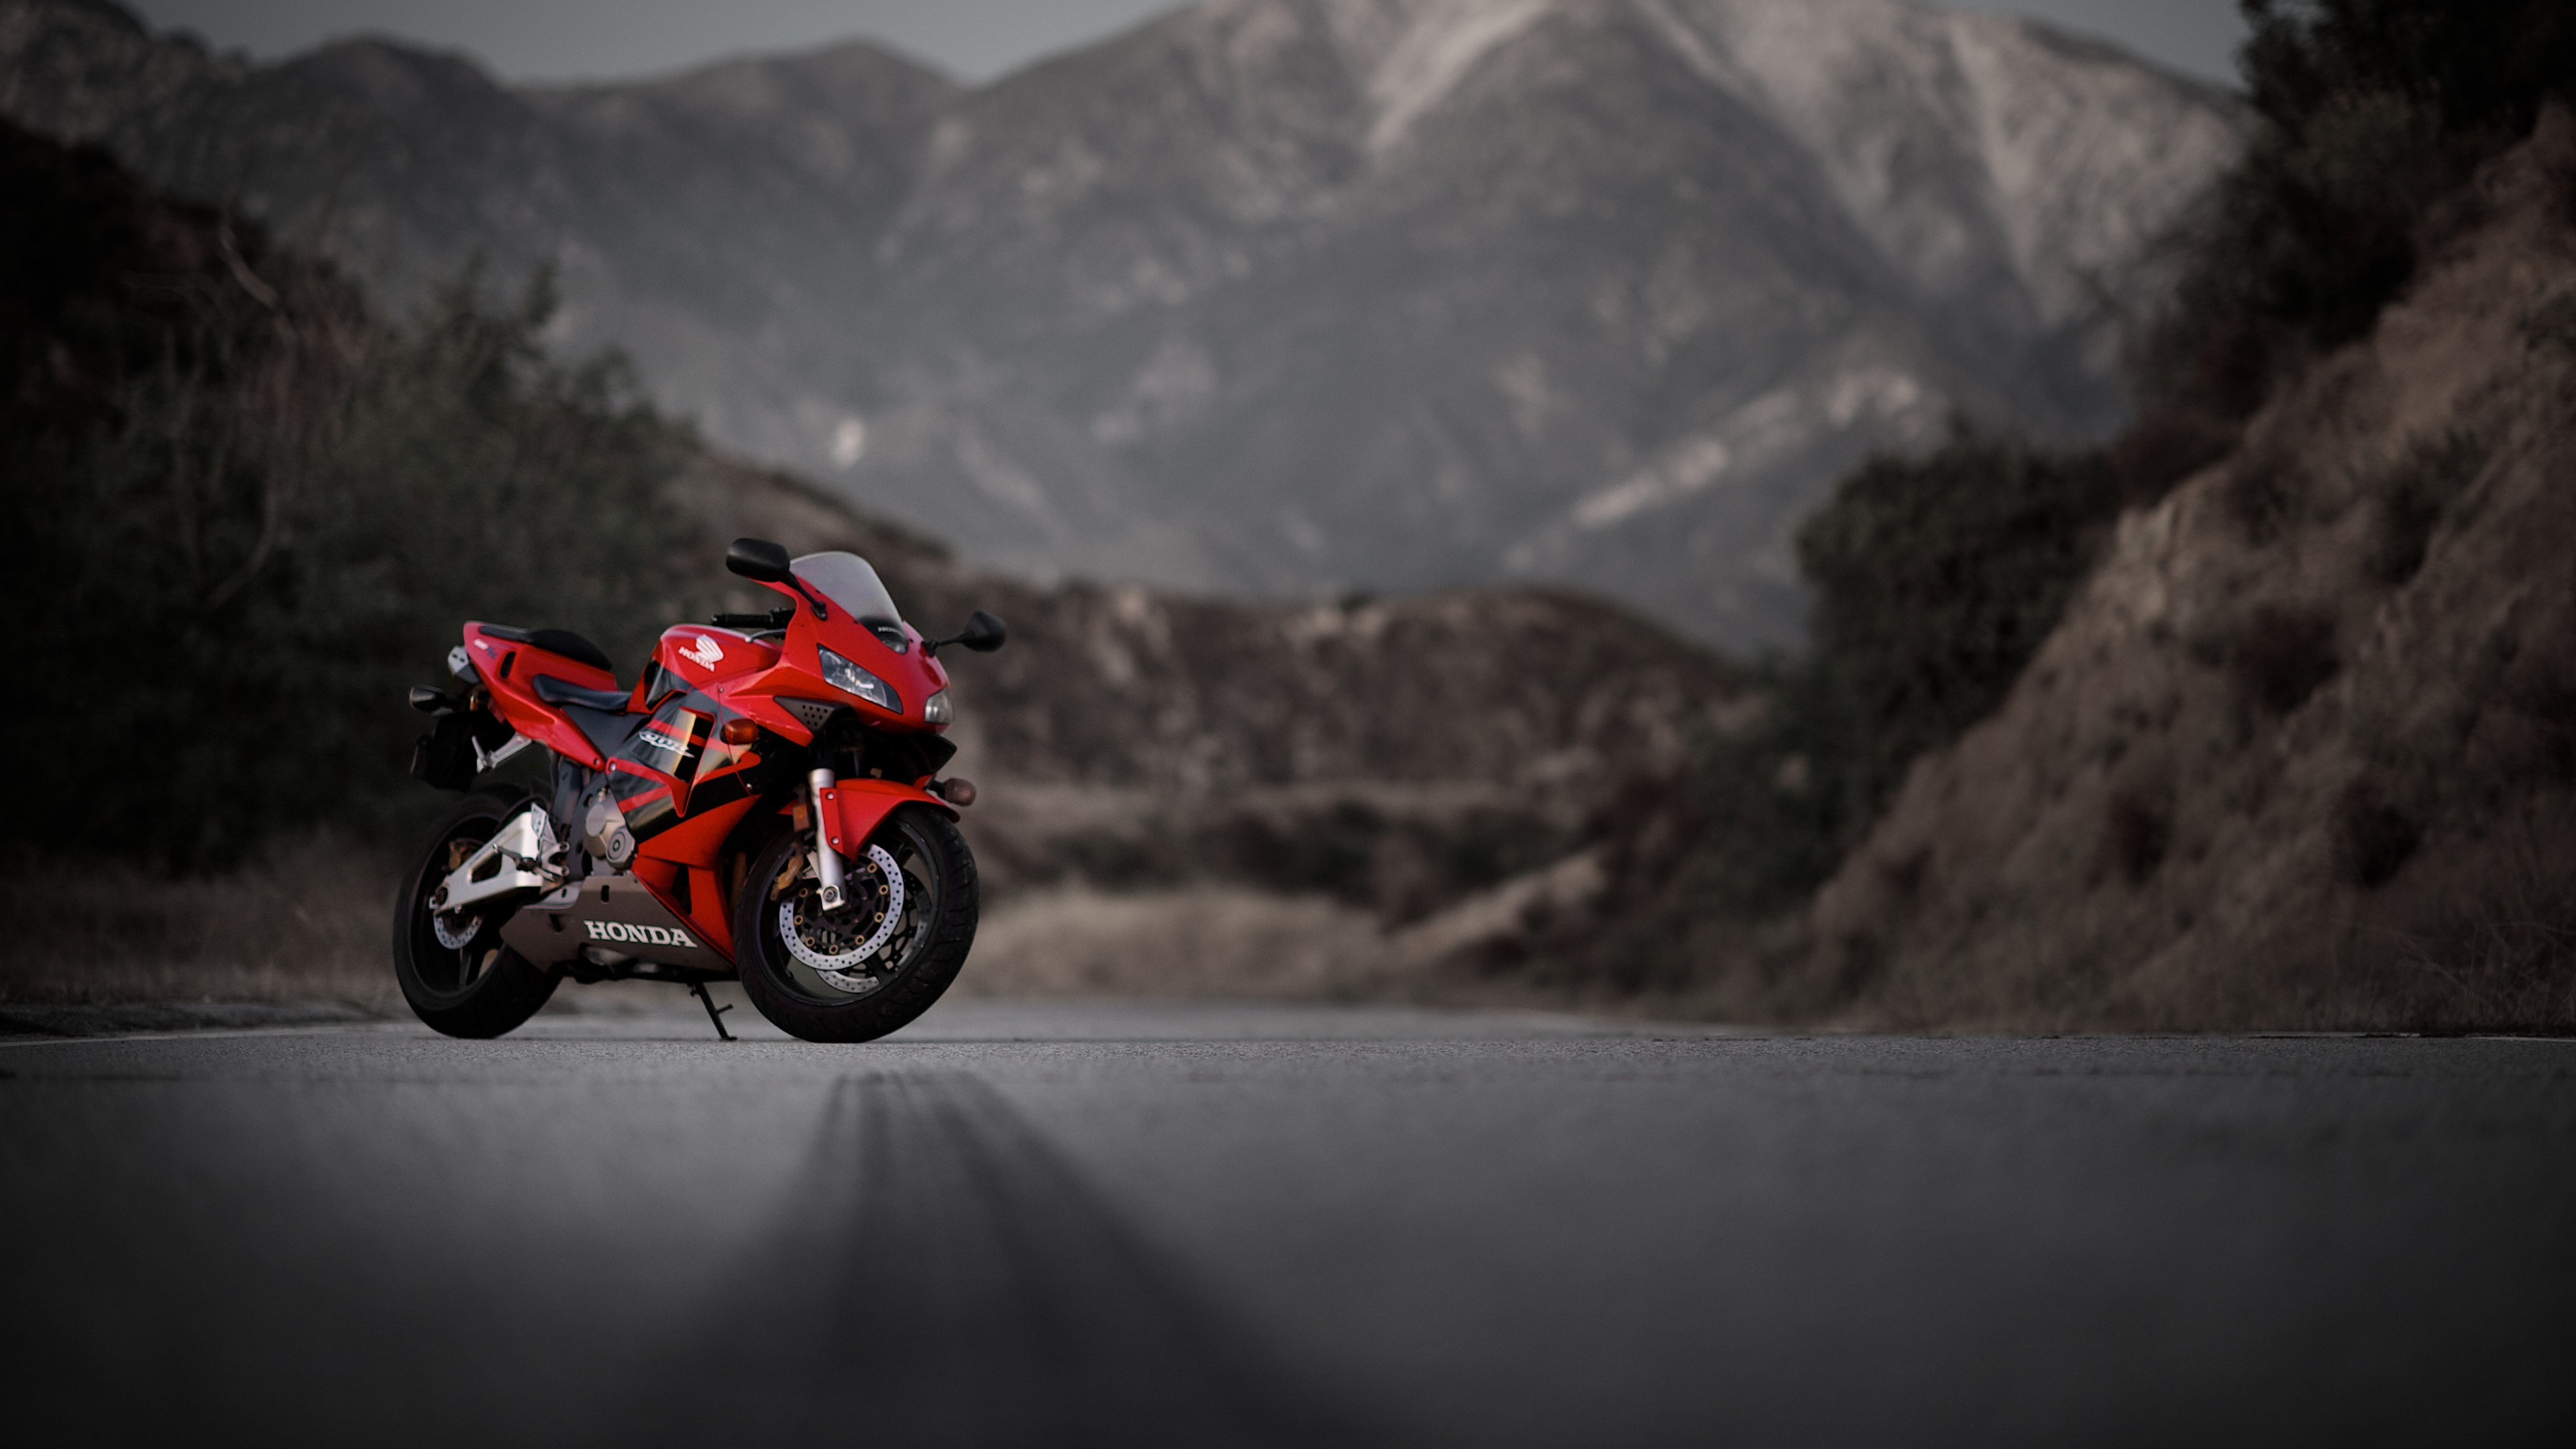 Red and Black Sports Bike on Road During Daytime. Wallpaper in 3840x2160 Resolution